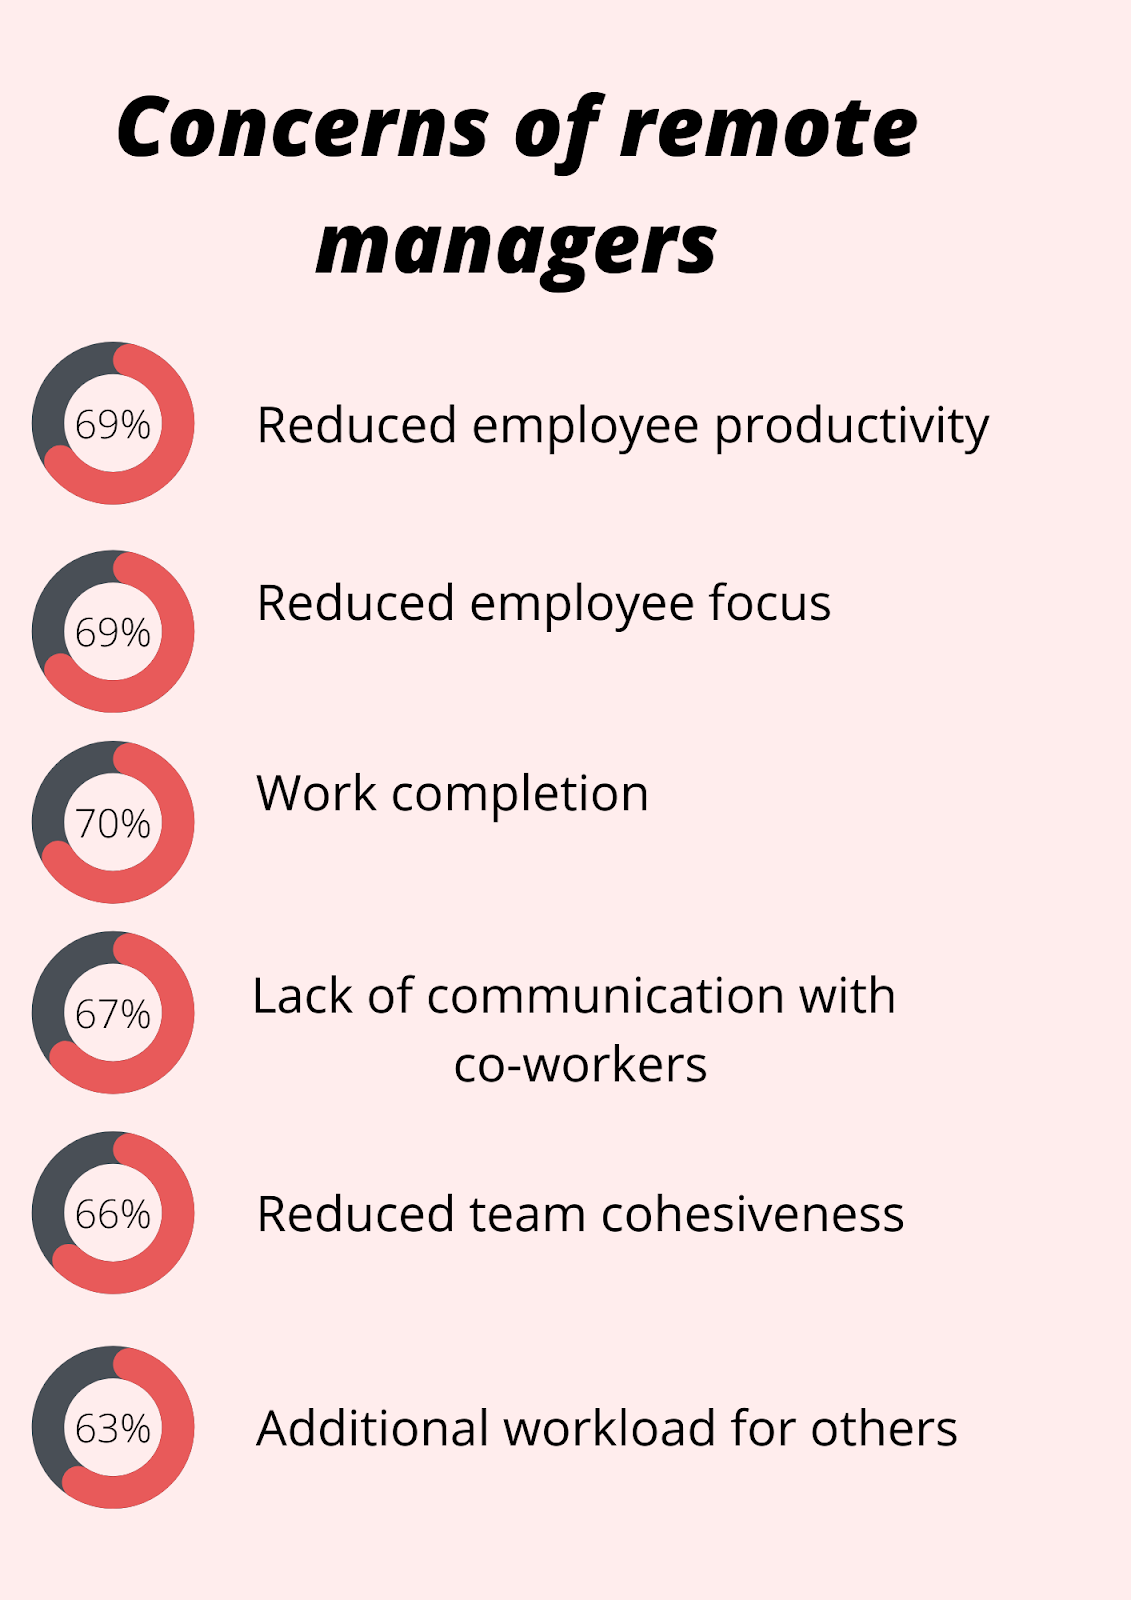 Concerns of remote managers infographic